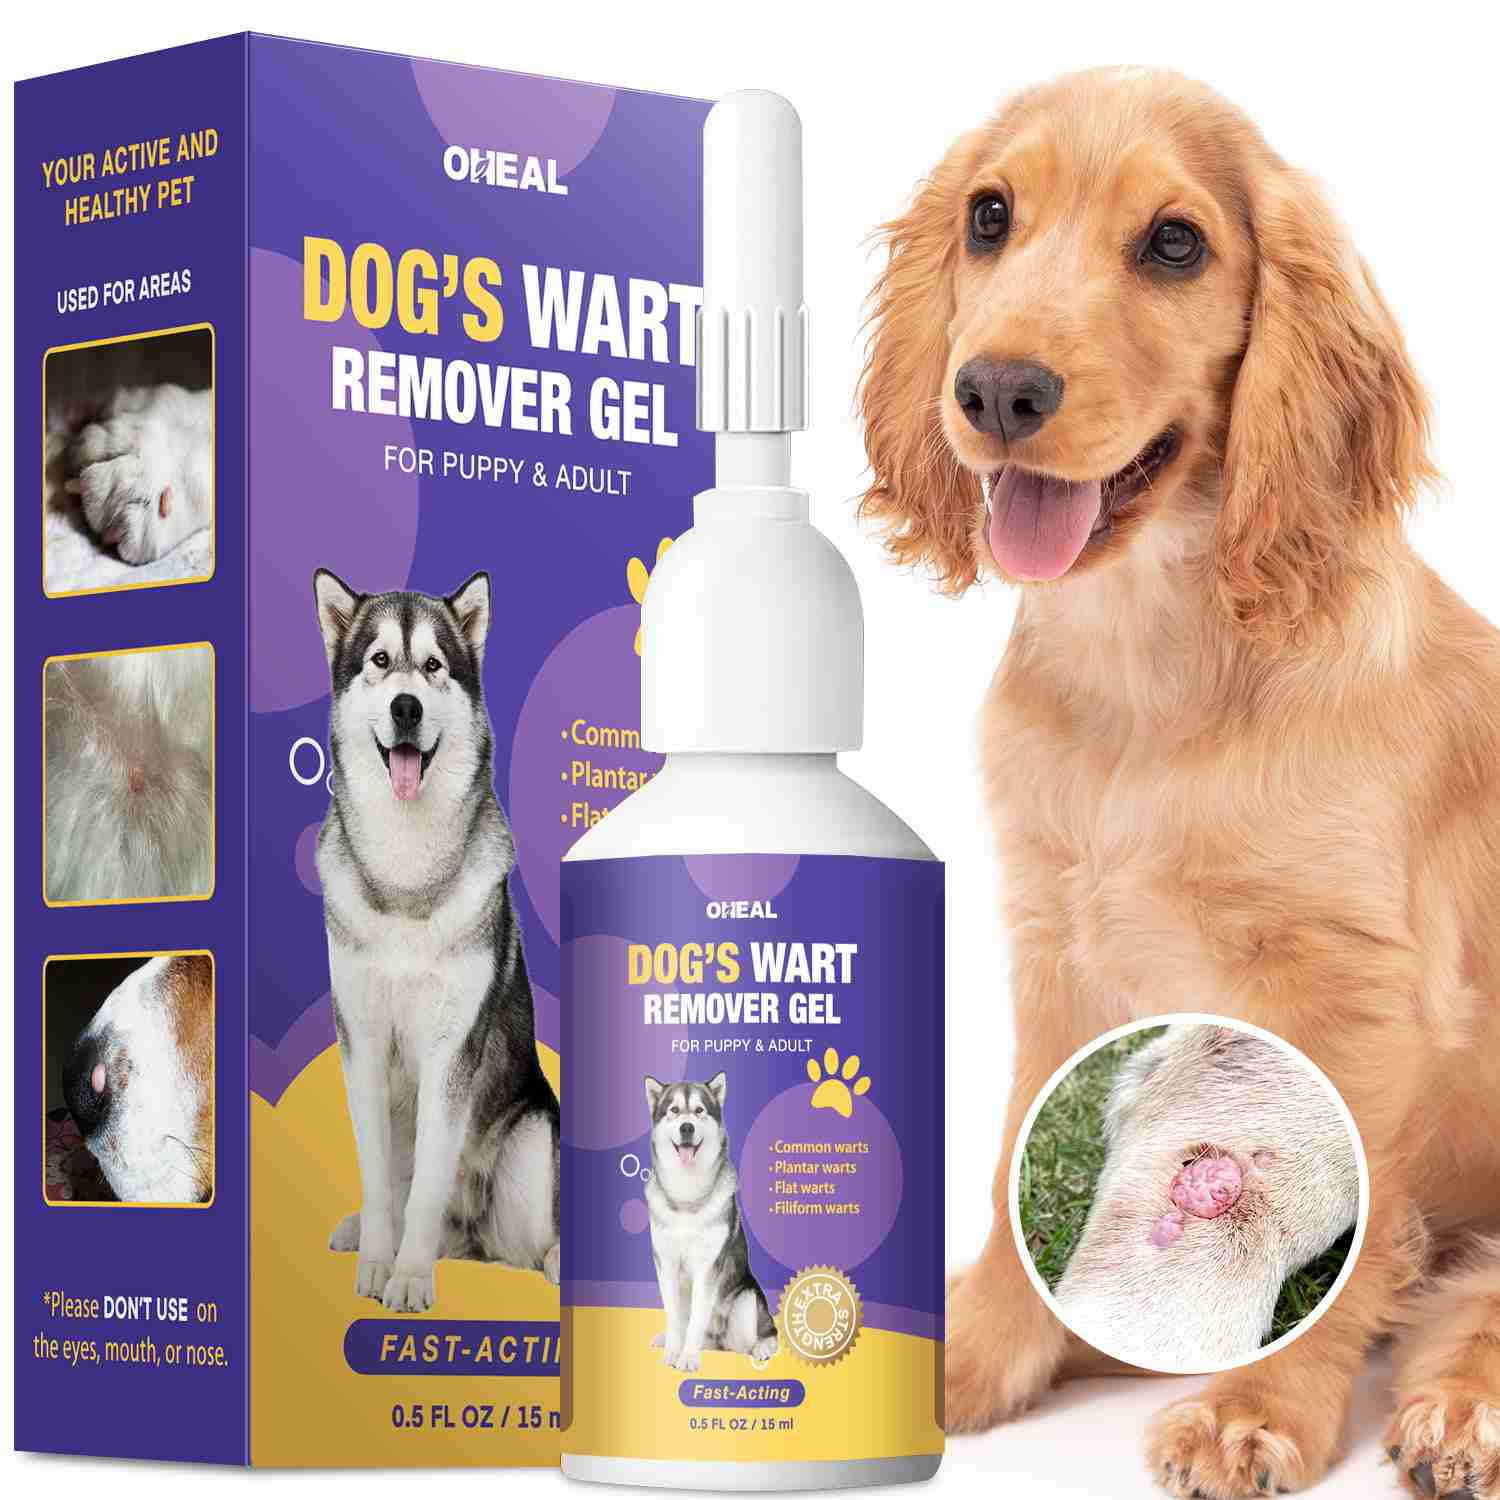 dog-wart-remover-dog-skin-tag-remover-wart-remover-for-dogs with cash back rebate